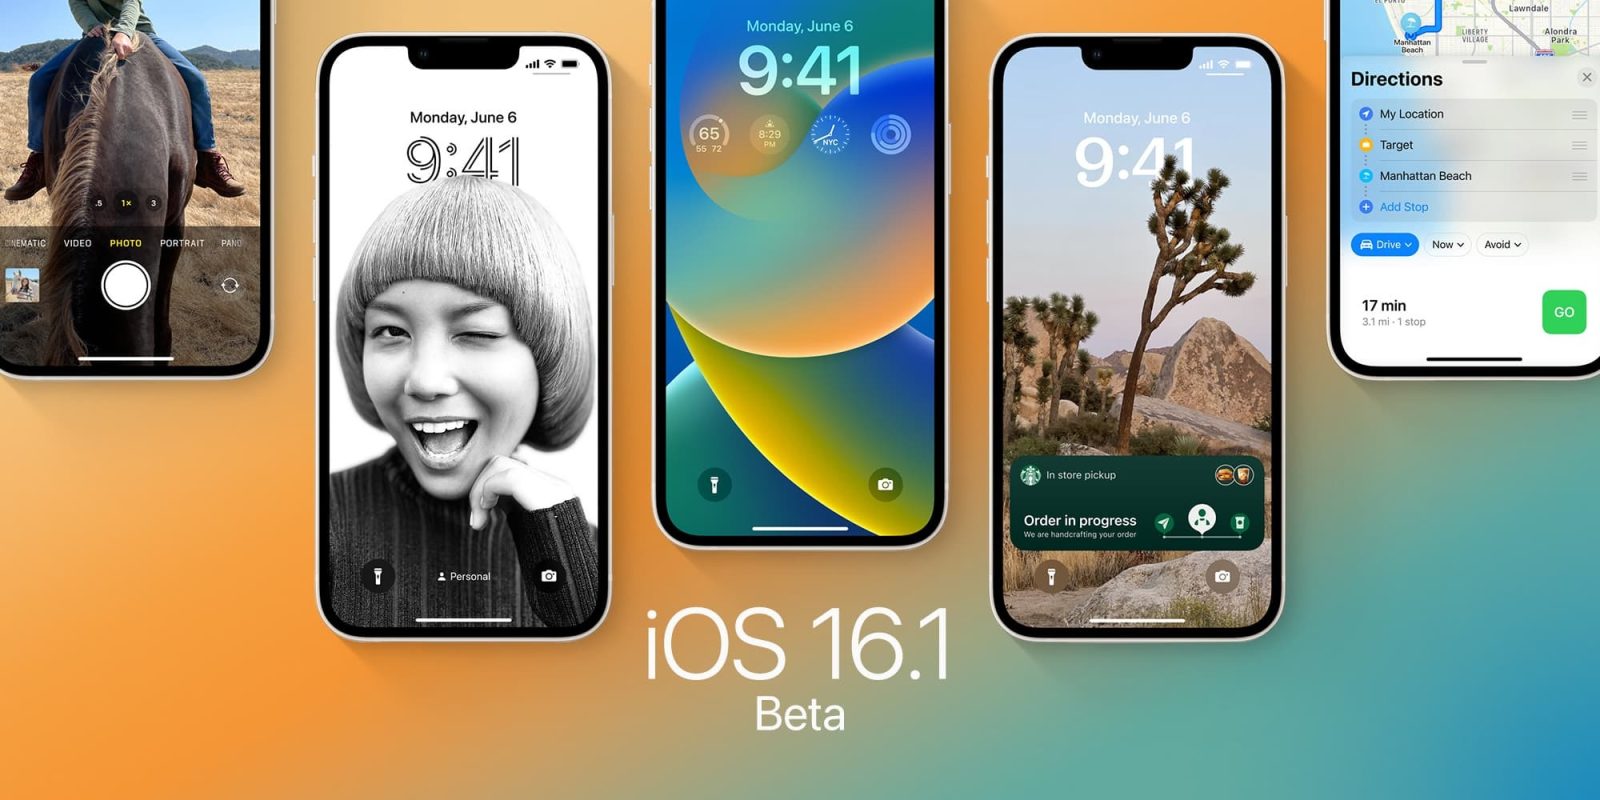 Betas Of iOS 16.1 - Should You Update?